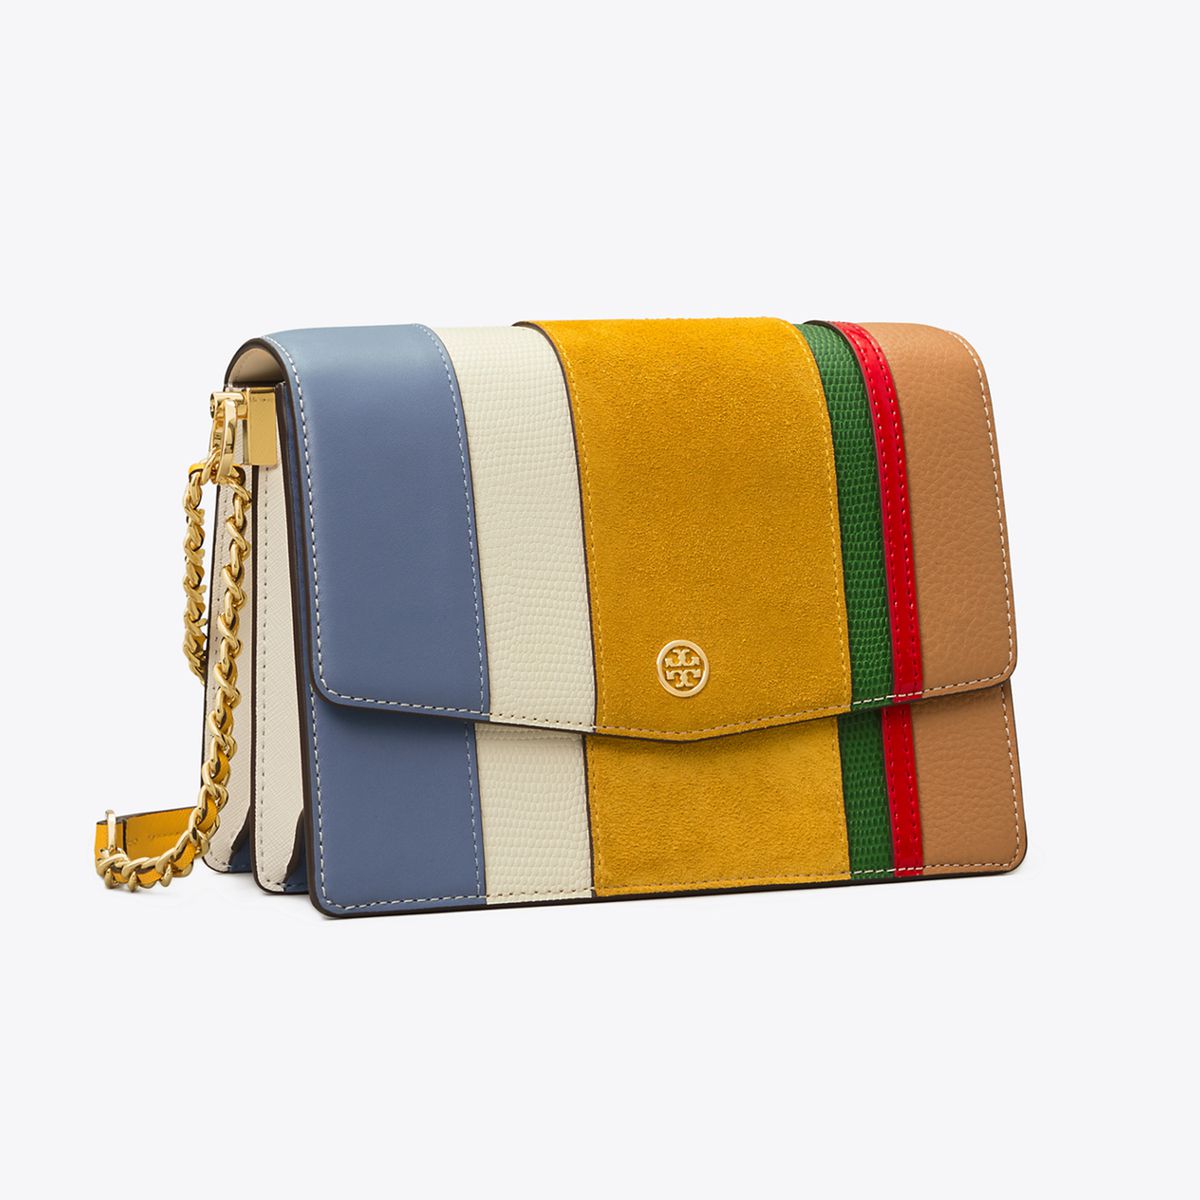 Tory Burch Just Launched Its Spring Sale Event | Travel + Leisure ...